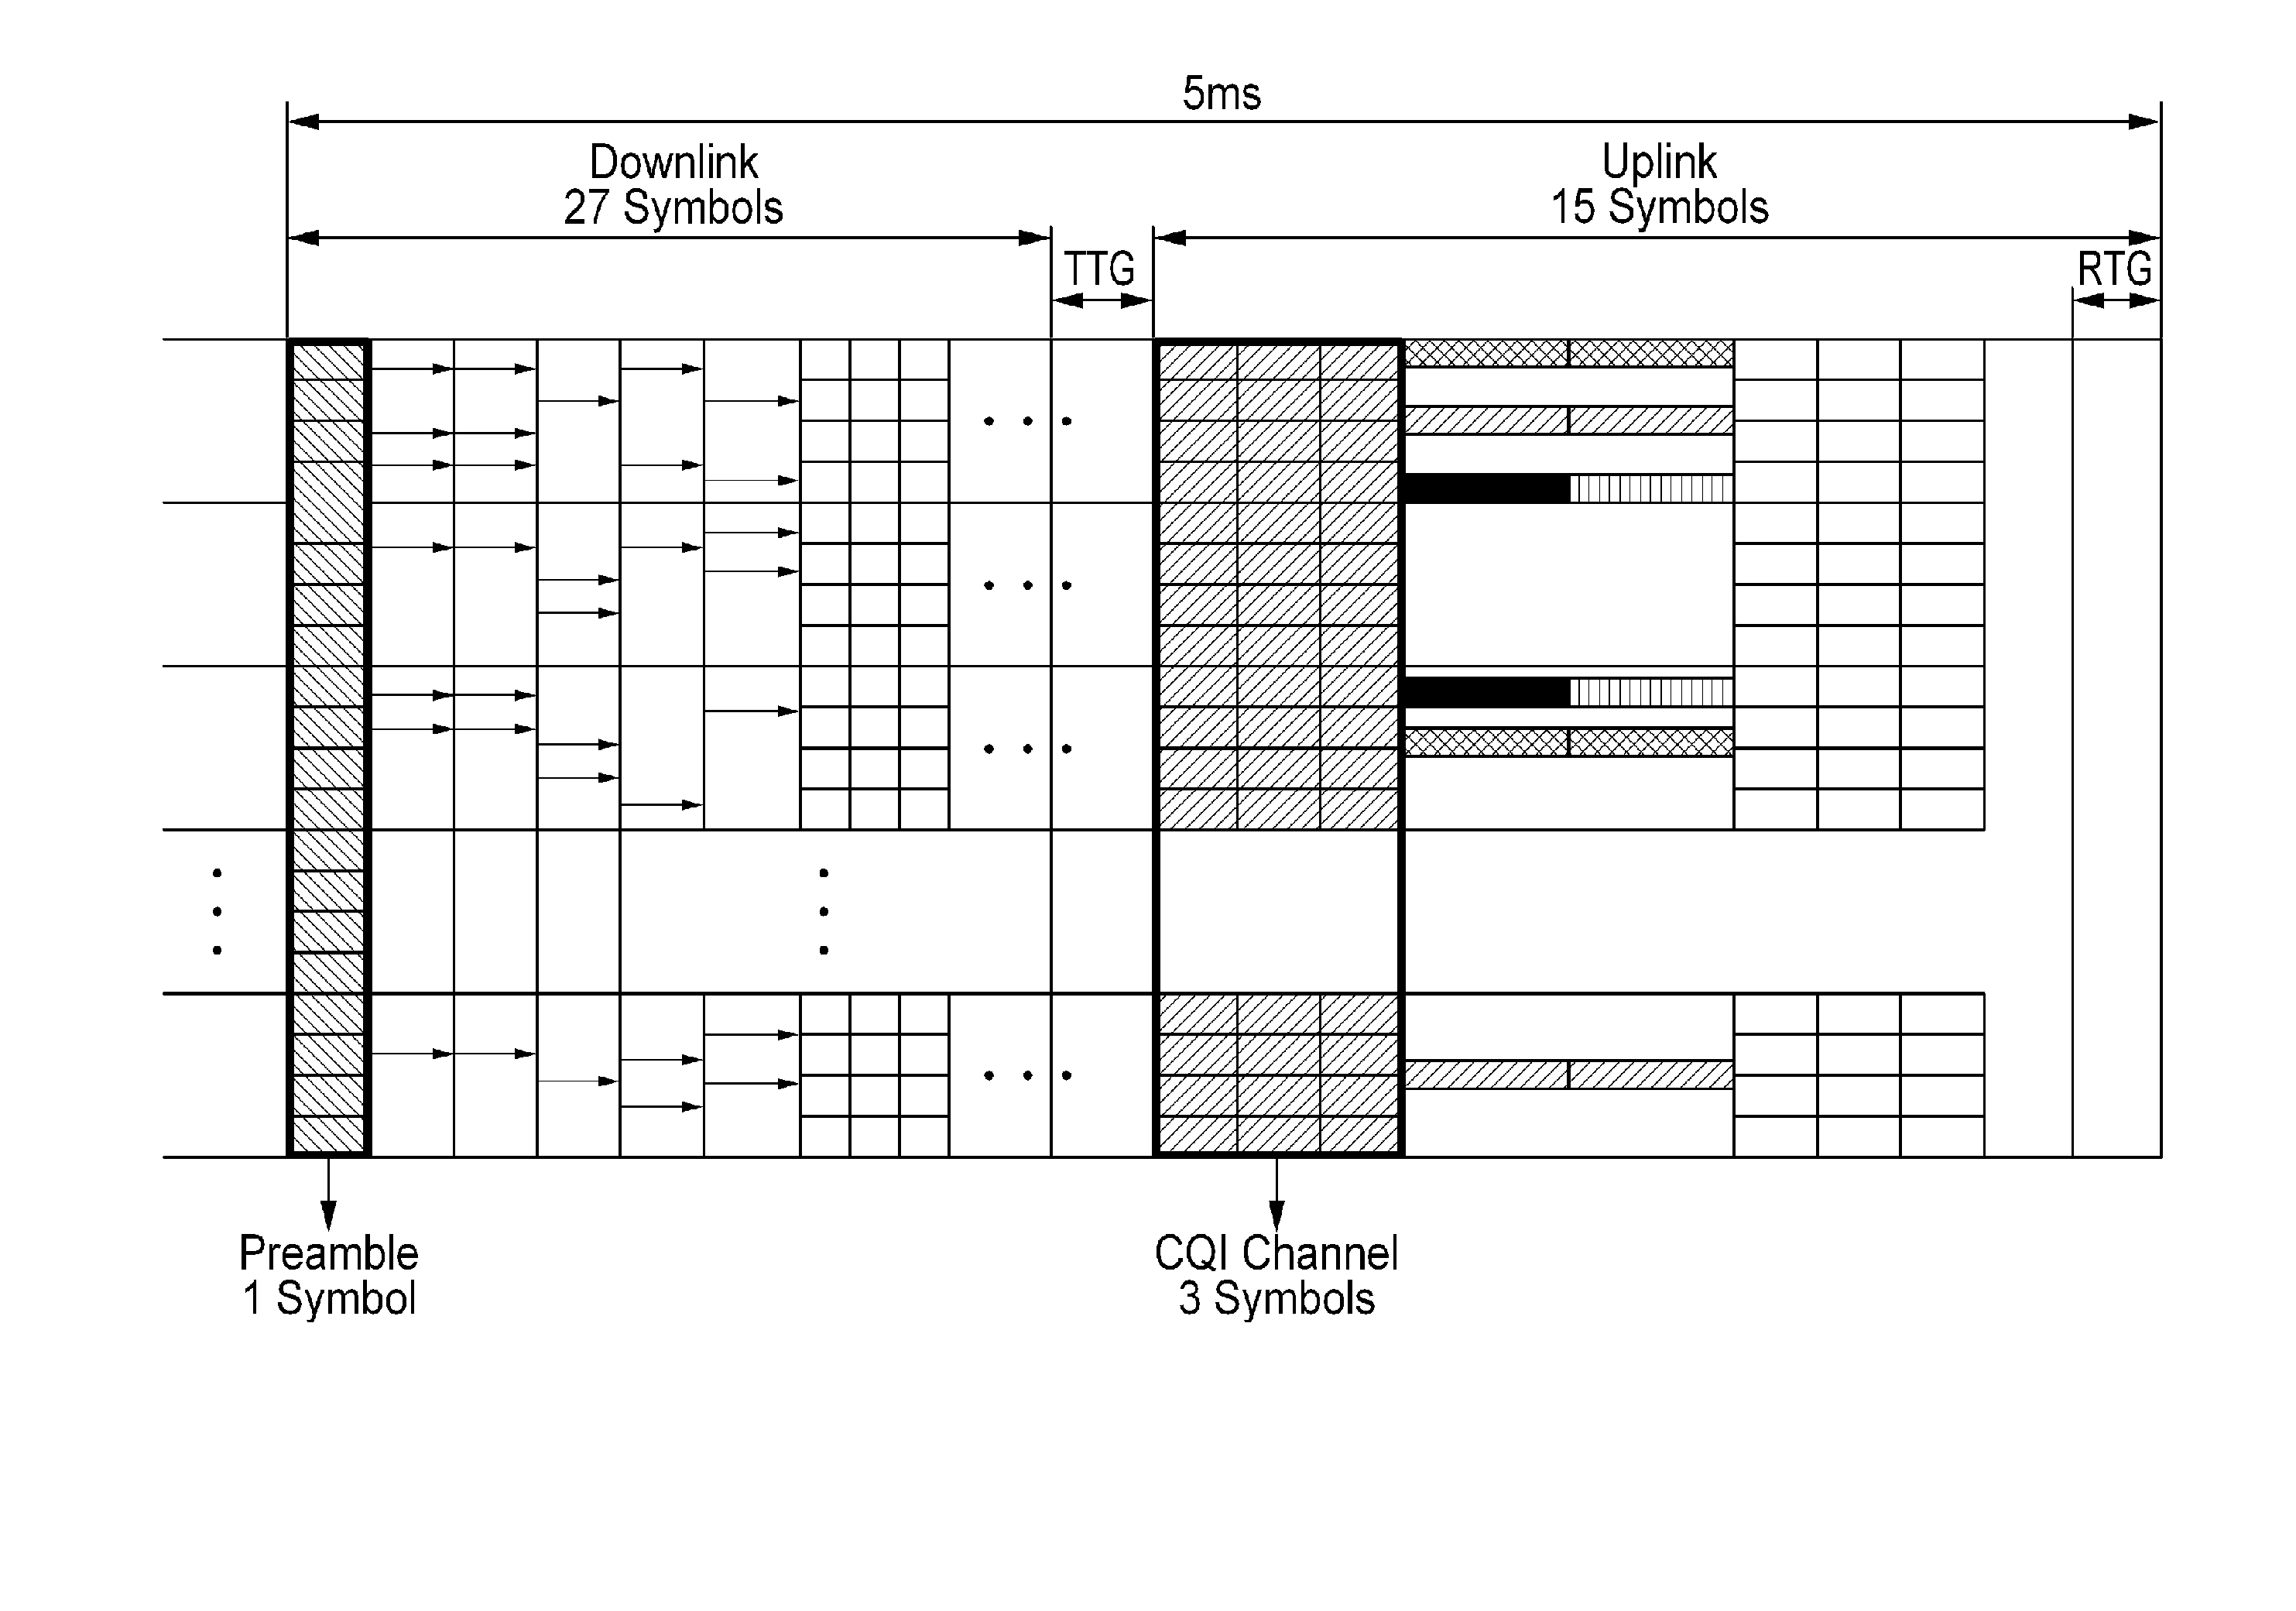 Method for dynamic resource allocation of uplink and downlink in ofdma/TDD cellular system